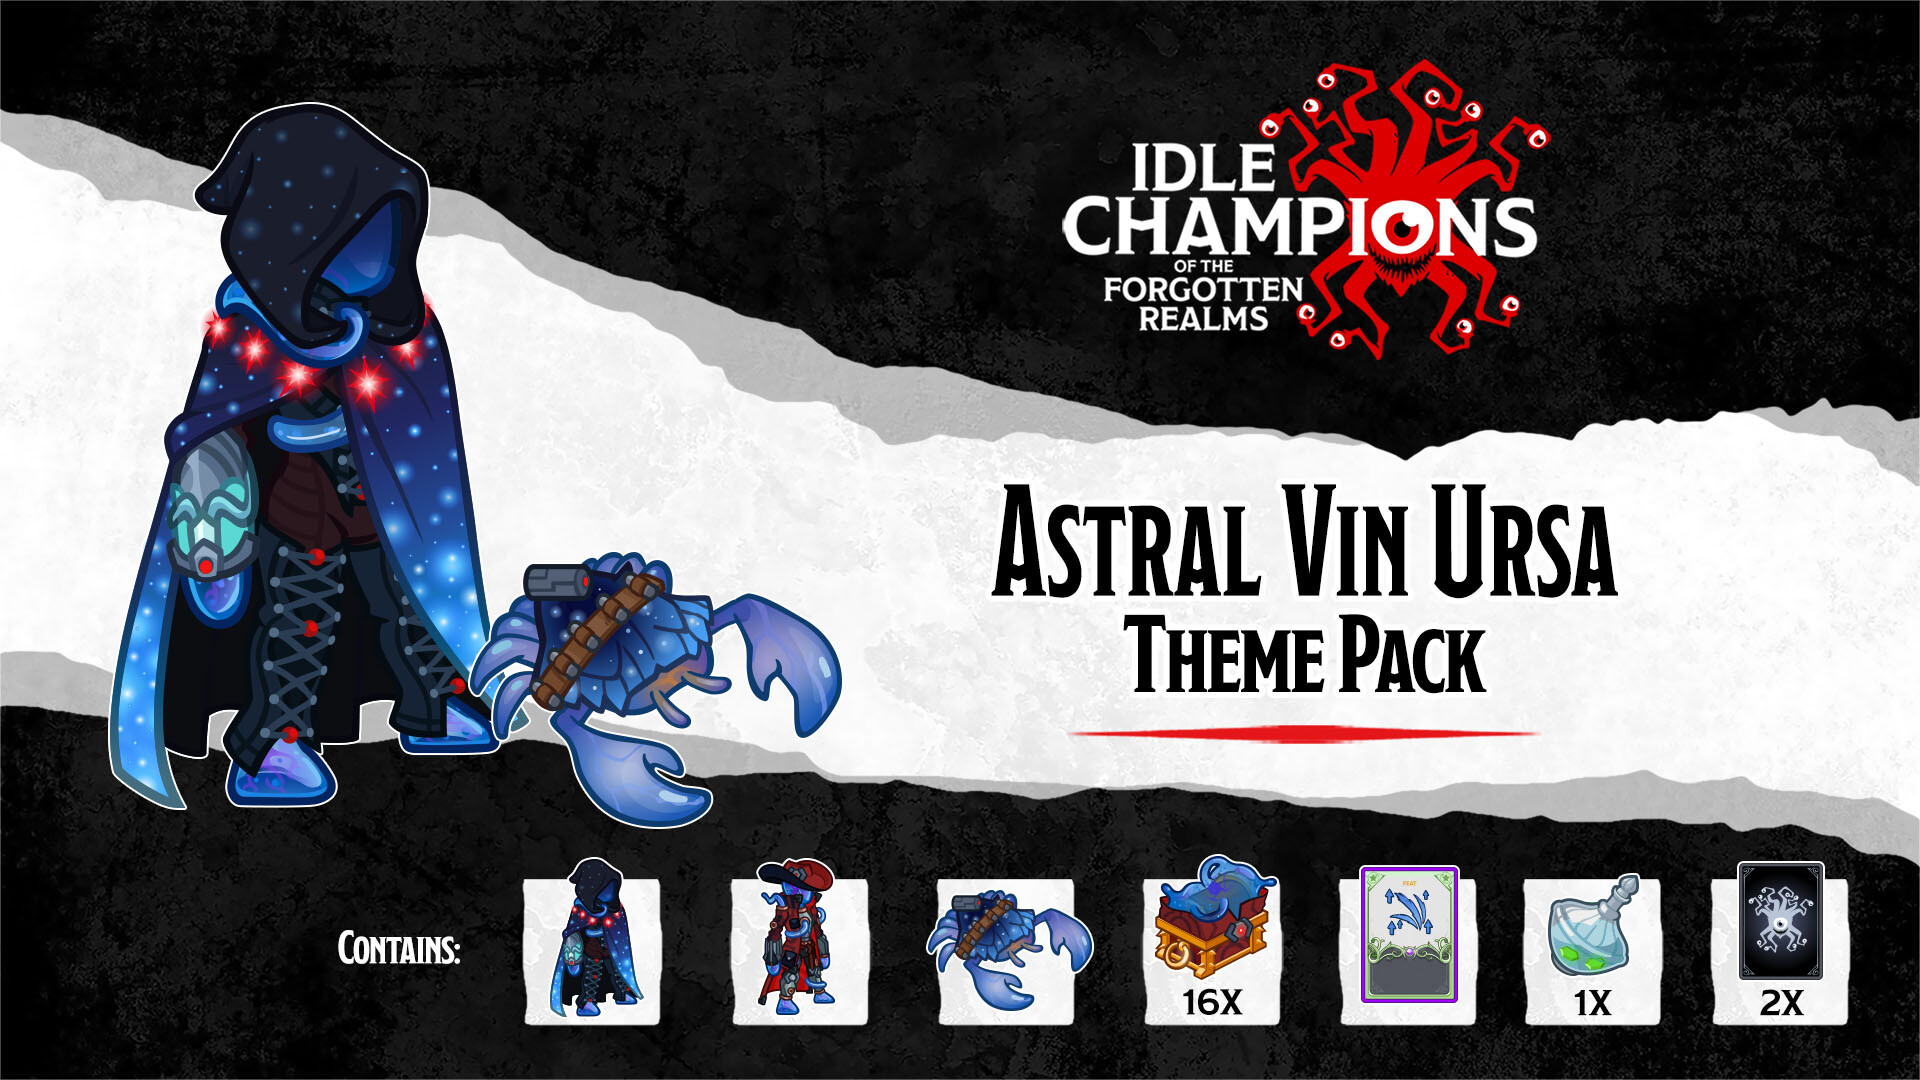 Idle Champions - Astral Vin Ursa Theme Pack Featured Screenshot #1